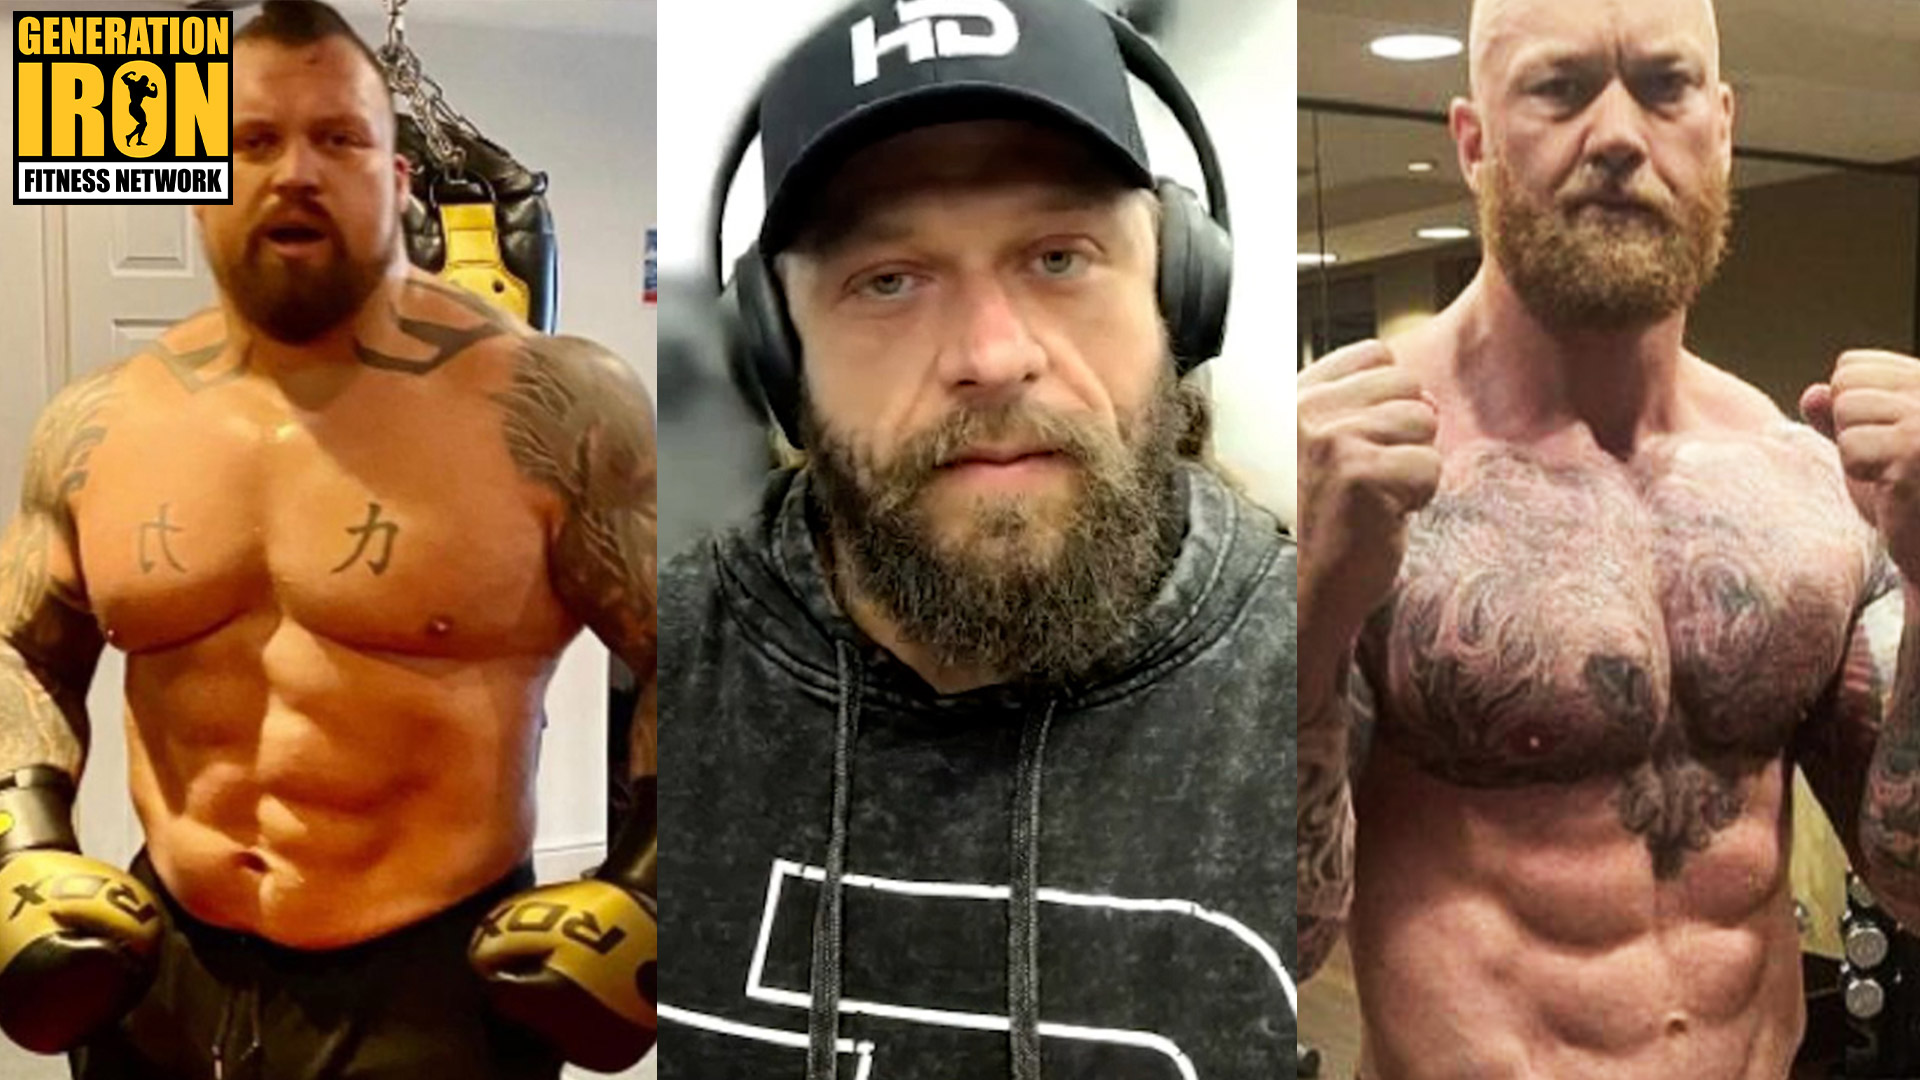 Jujimufu: Eddie Hall & Thor Bjornsson Boxing Is The “Best Thing For Their Personal Lives”